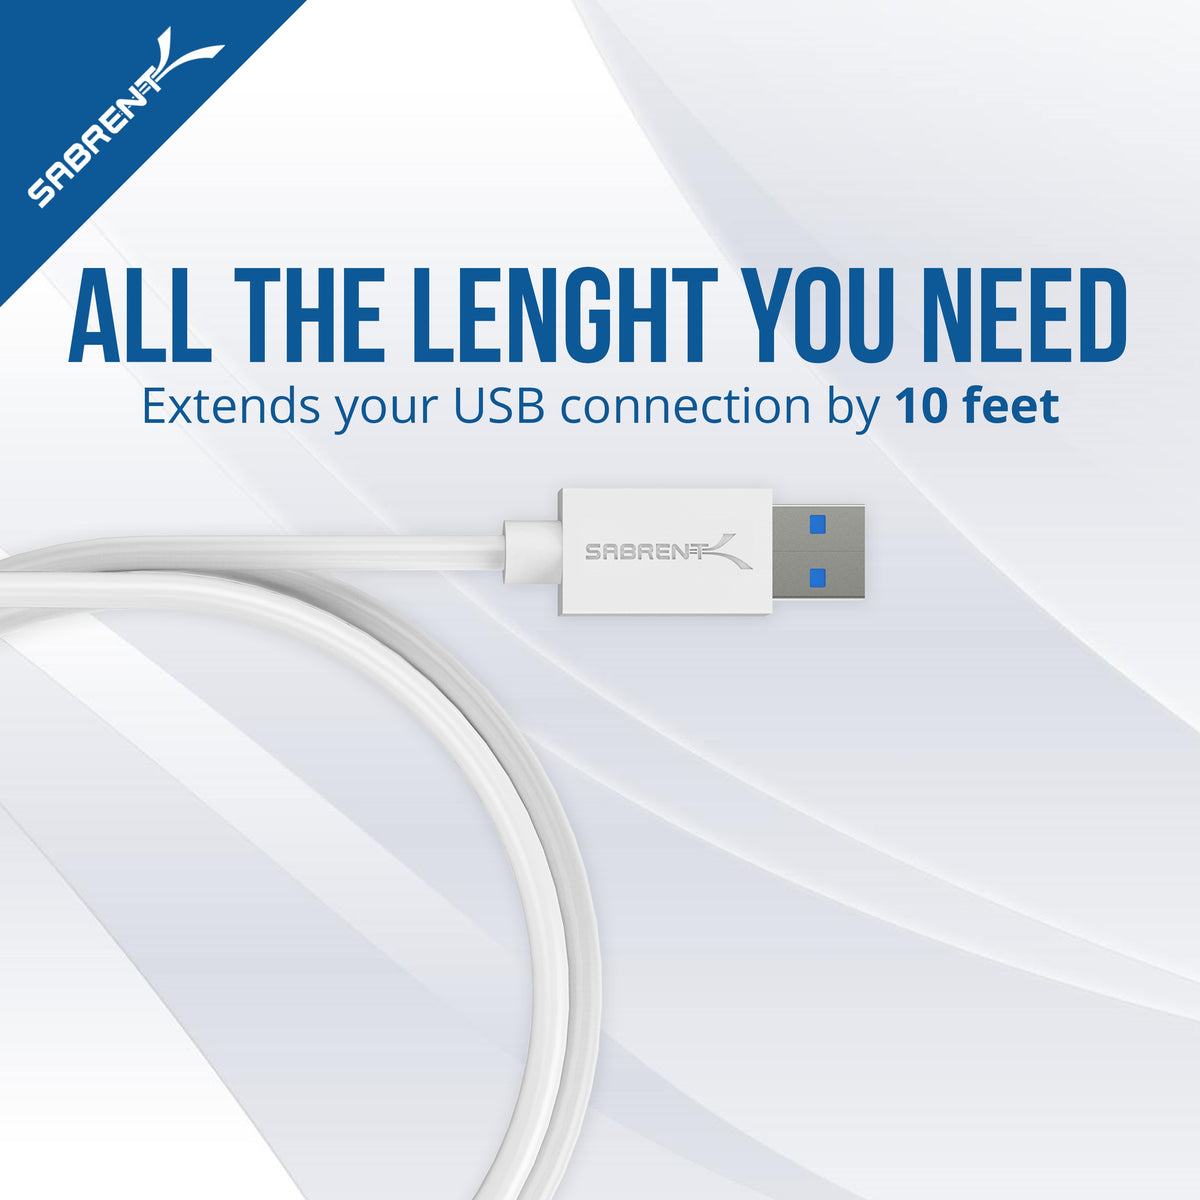 22AWG USB 3.0 Extension Cable - A-Male to A-Female [White] 10 Feet